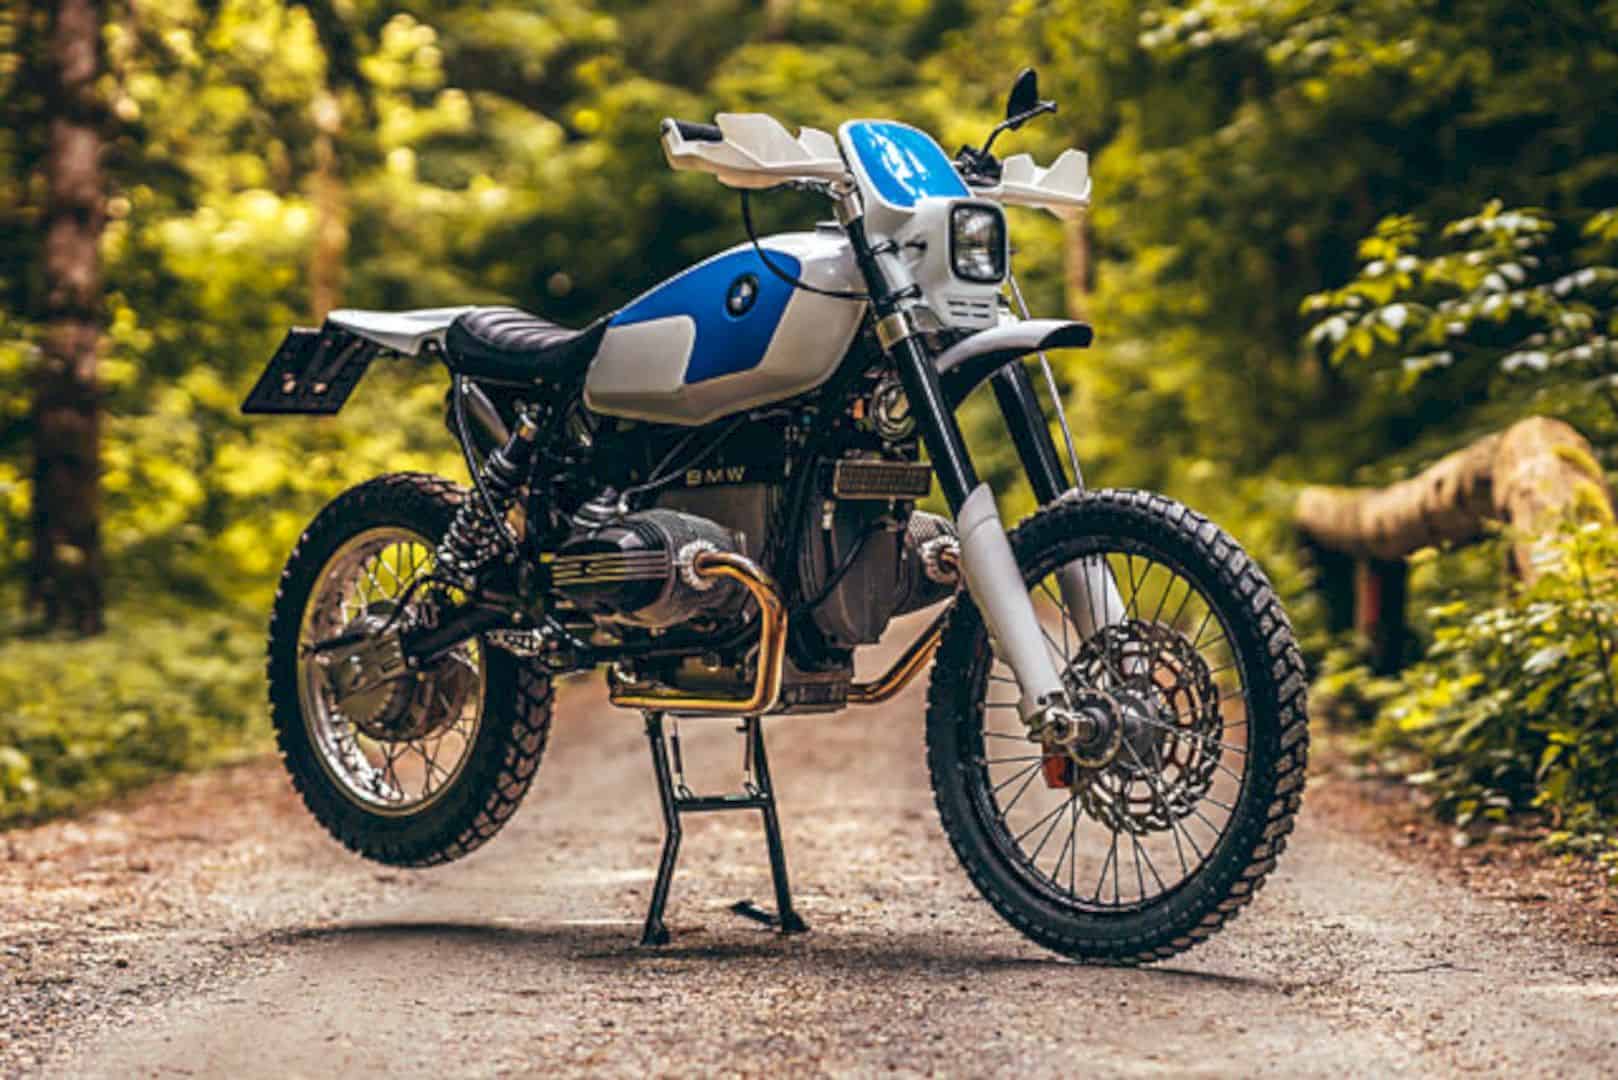 Bmw R80gs Enduro By Nct Motorcycles 10